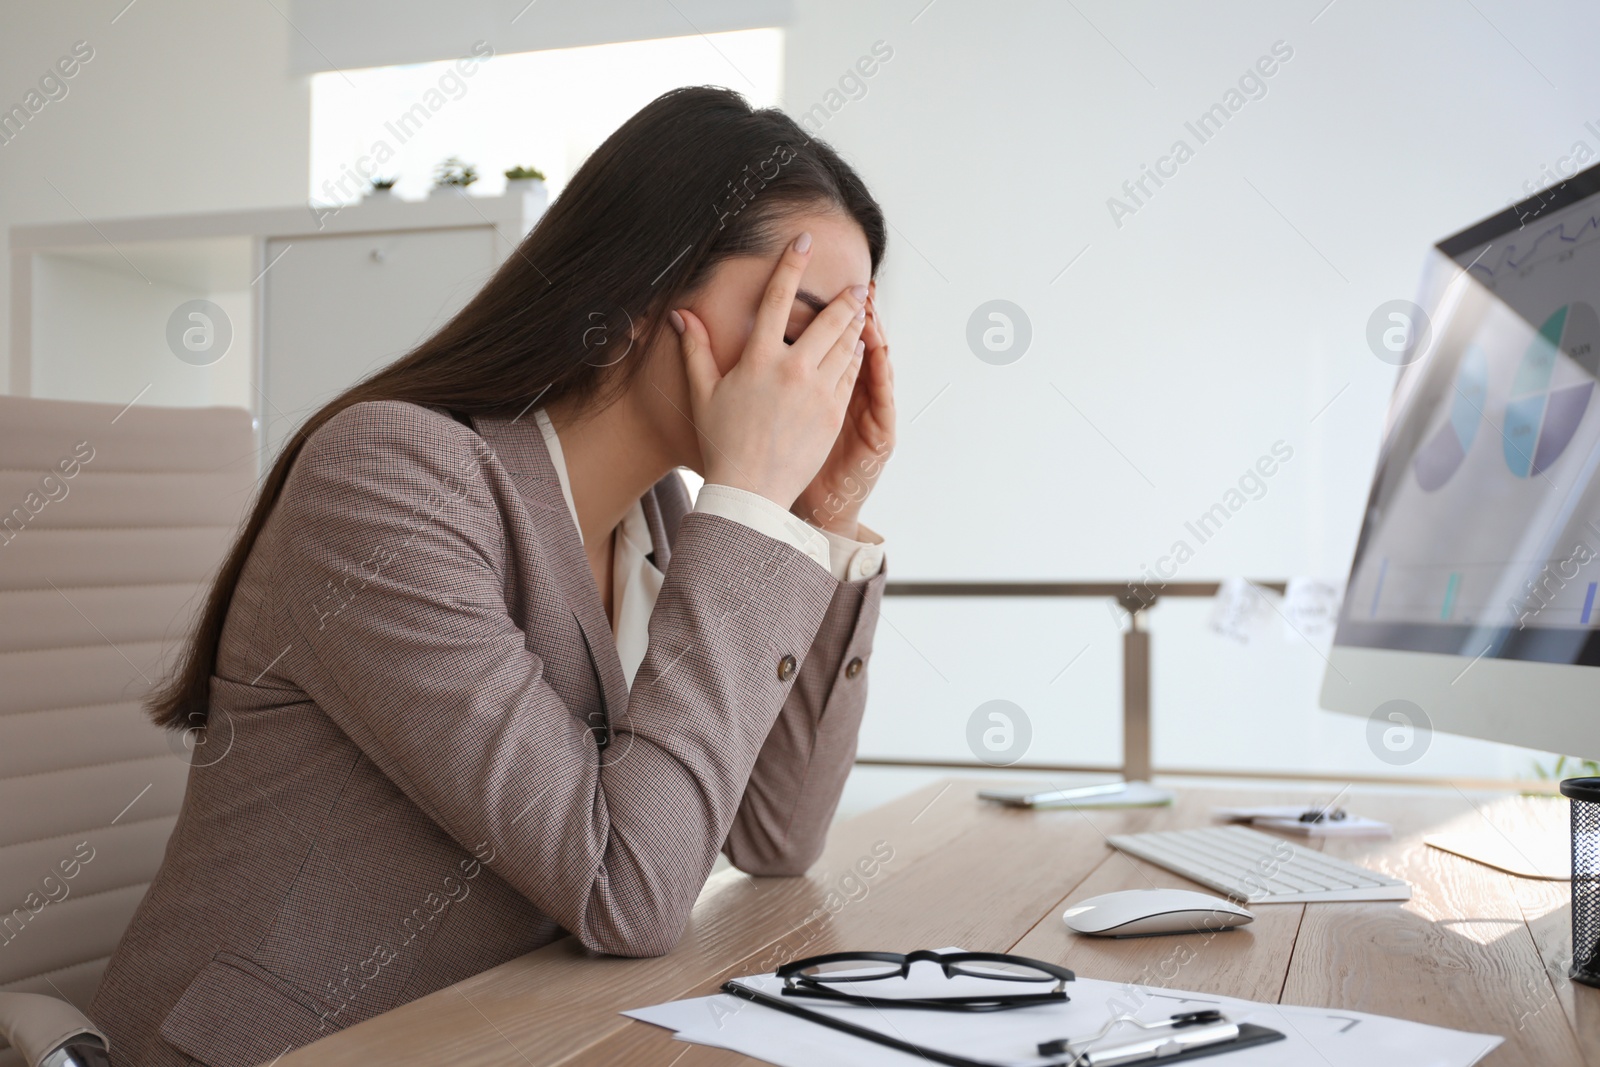 Photo of Businesswoman stressing out at workplace in office